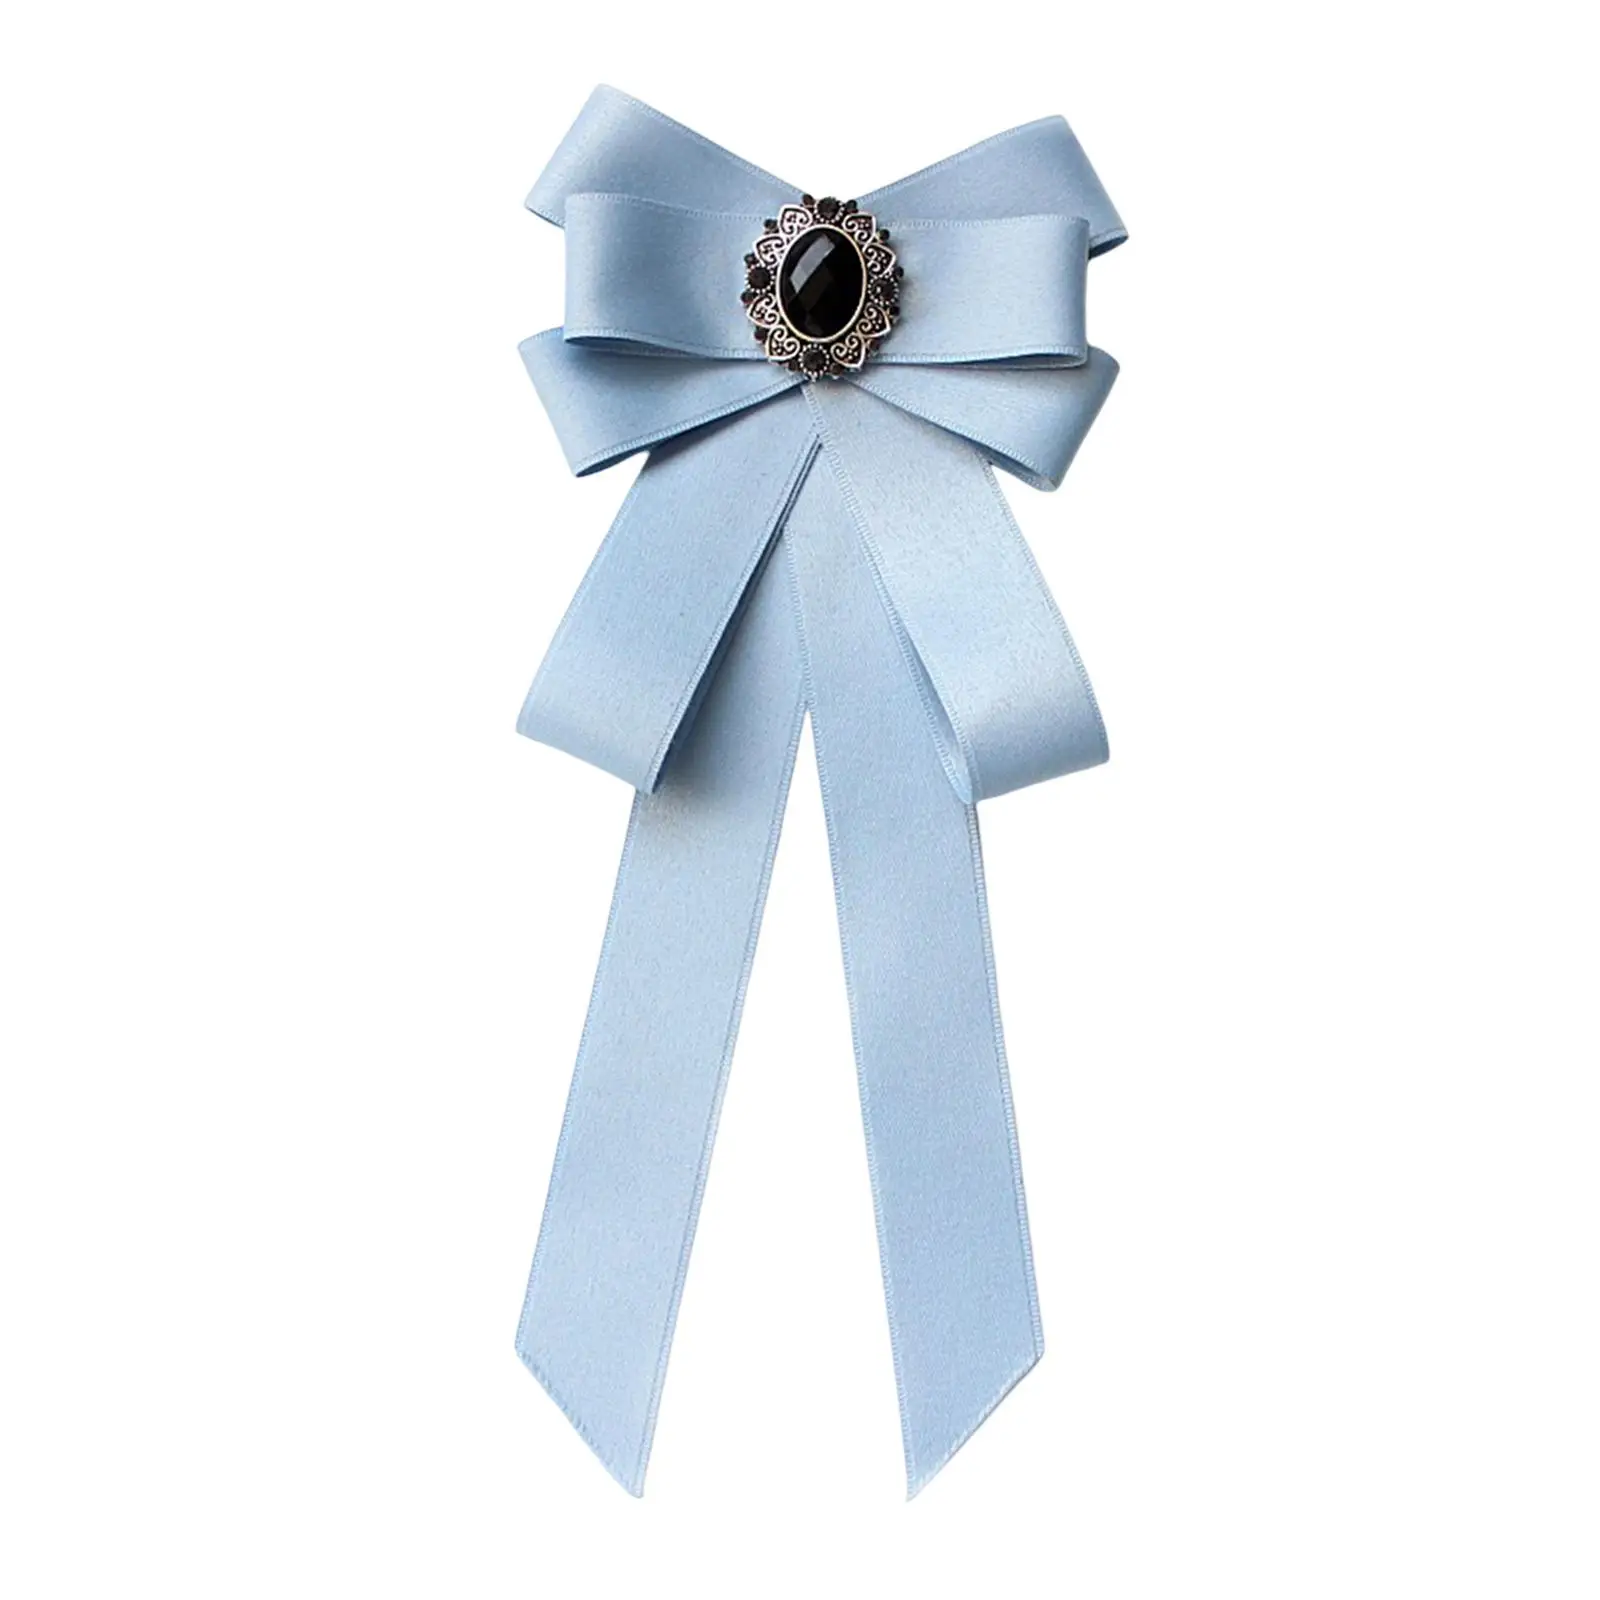 Women' Tied Bowknot Decoration Necklace Ladies Girls Ribbon Brooch for Party Holiday Wedding Costume Accessory Office